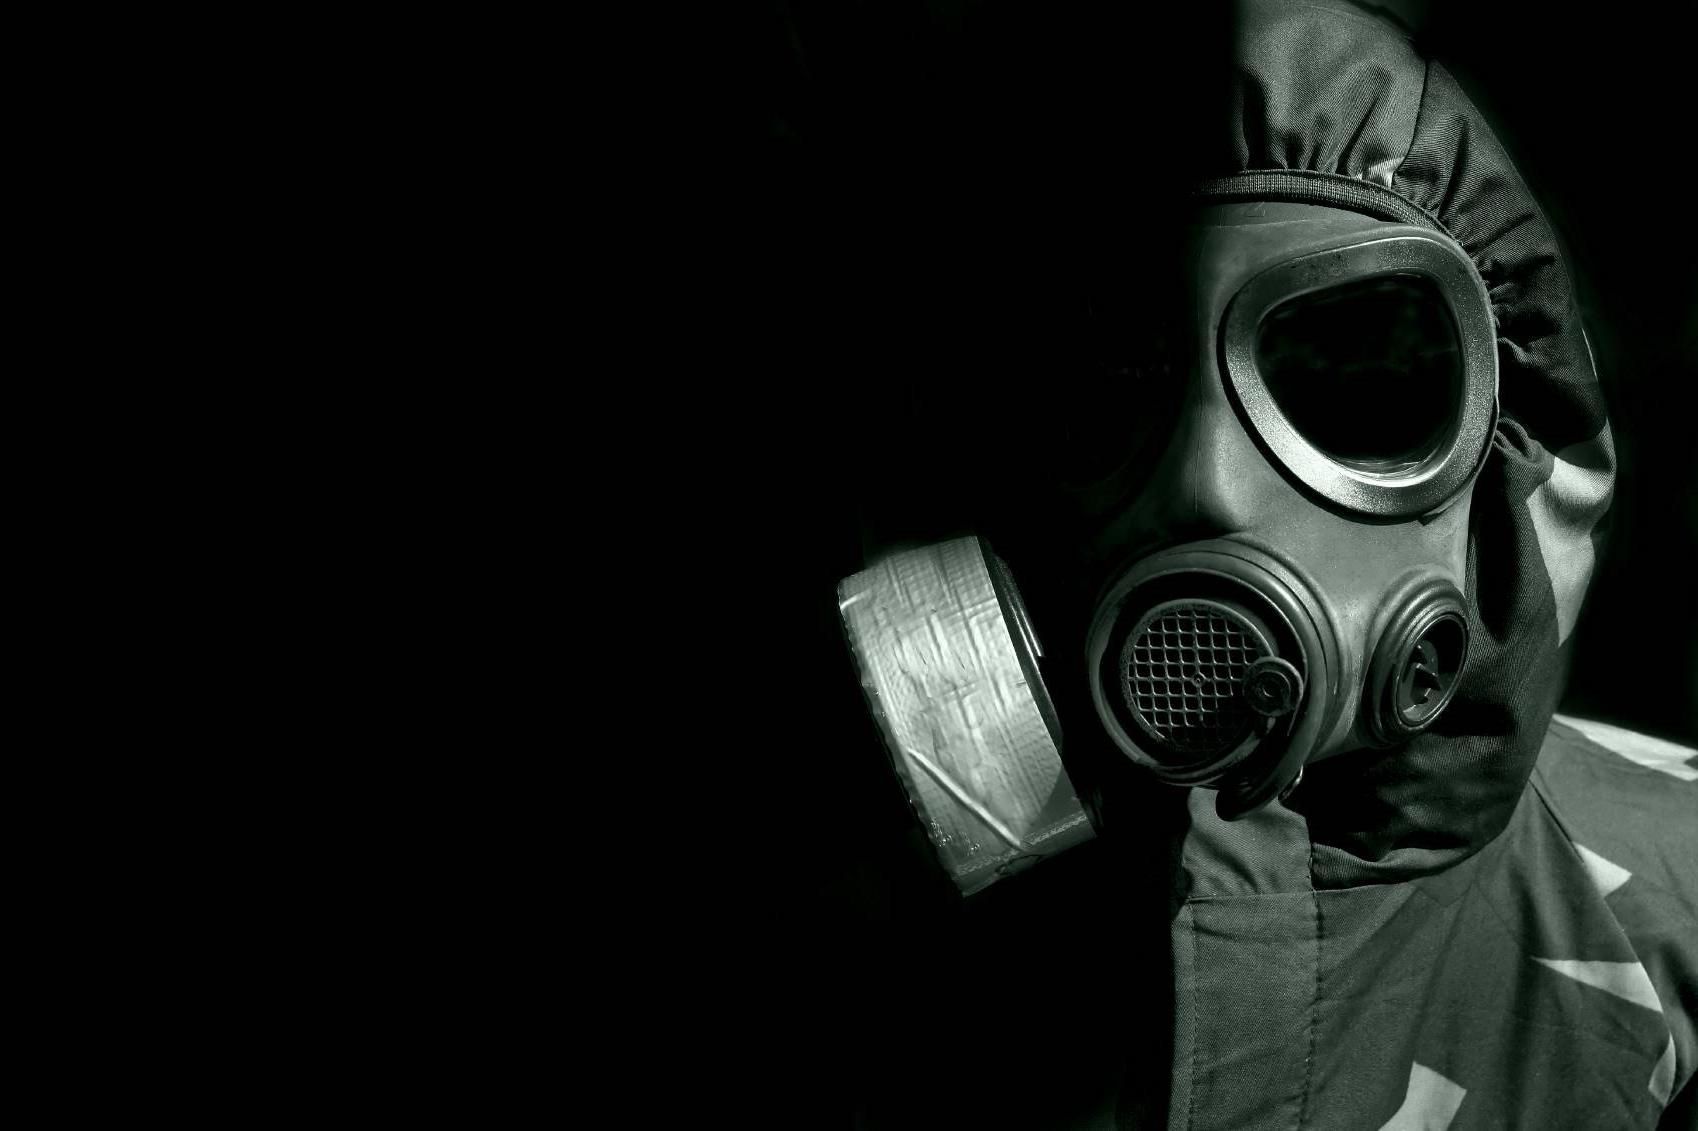 Free download wallpaper soldier gas mask war wallpaper download photo gas mask [1698x1131] for your Desktop, Mobile & Tablet. Explore Cool Gas Mask Wallpaper. Mask Wallpaper, Gas Mask Wallpaper